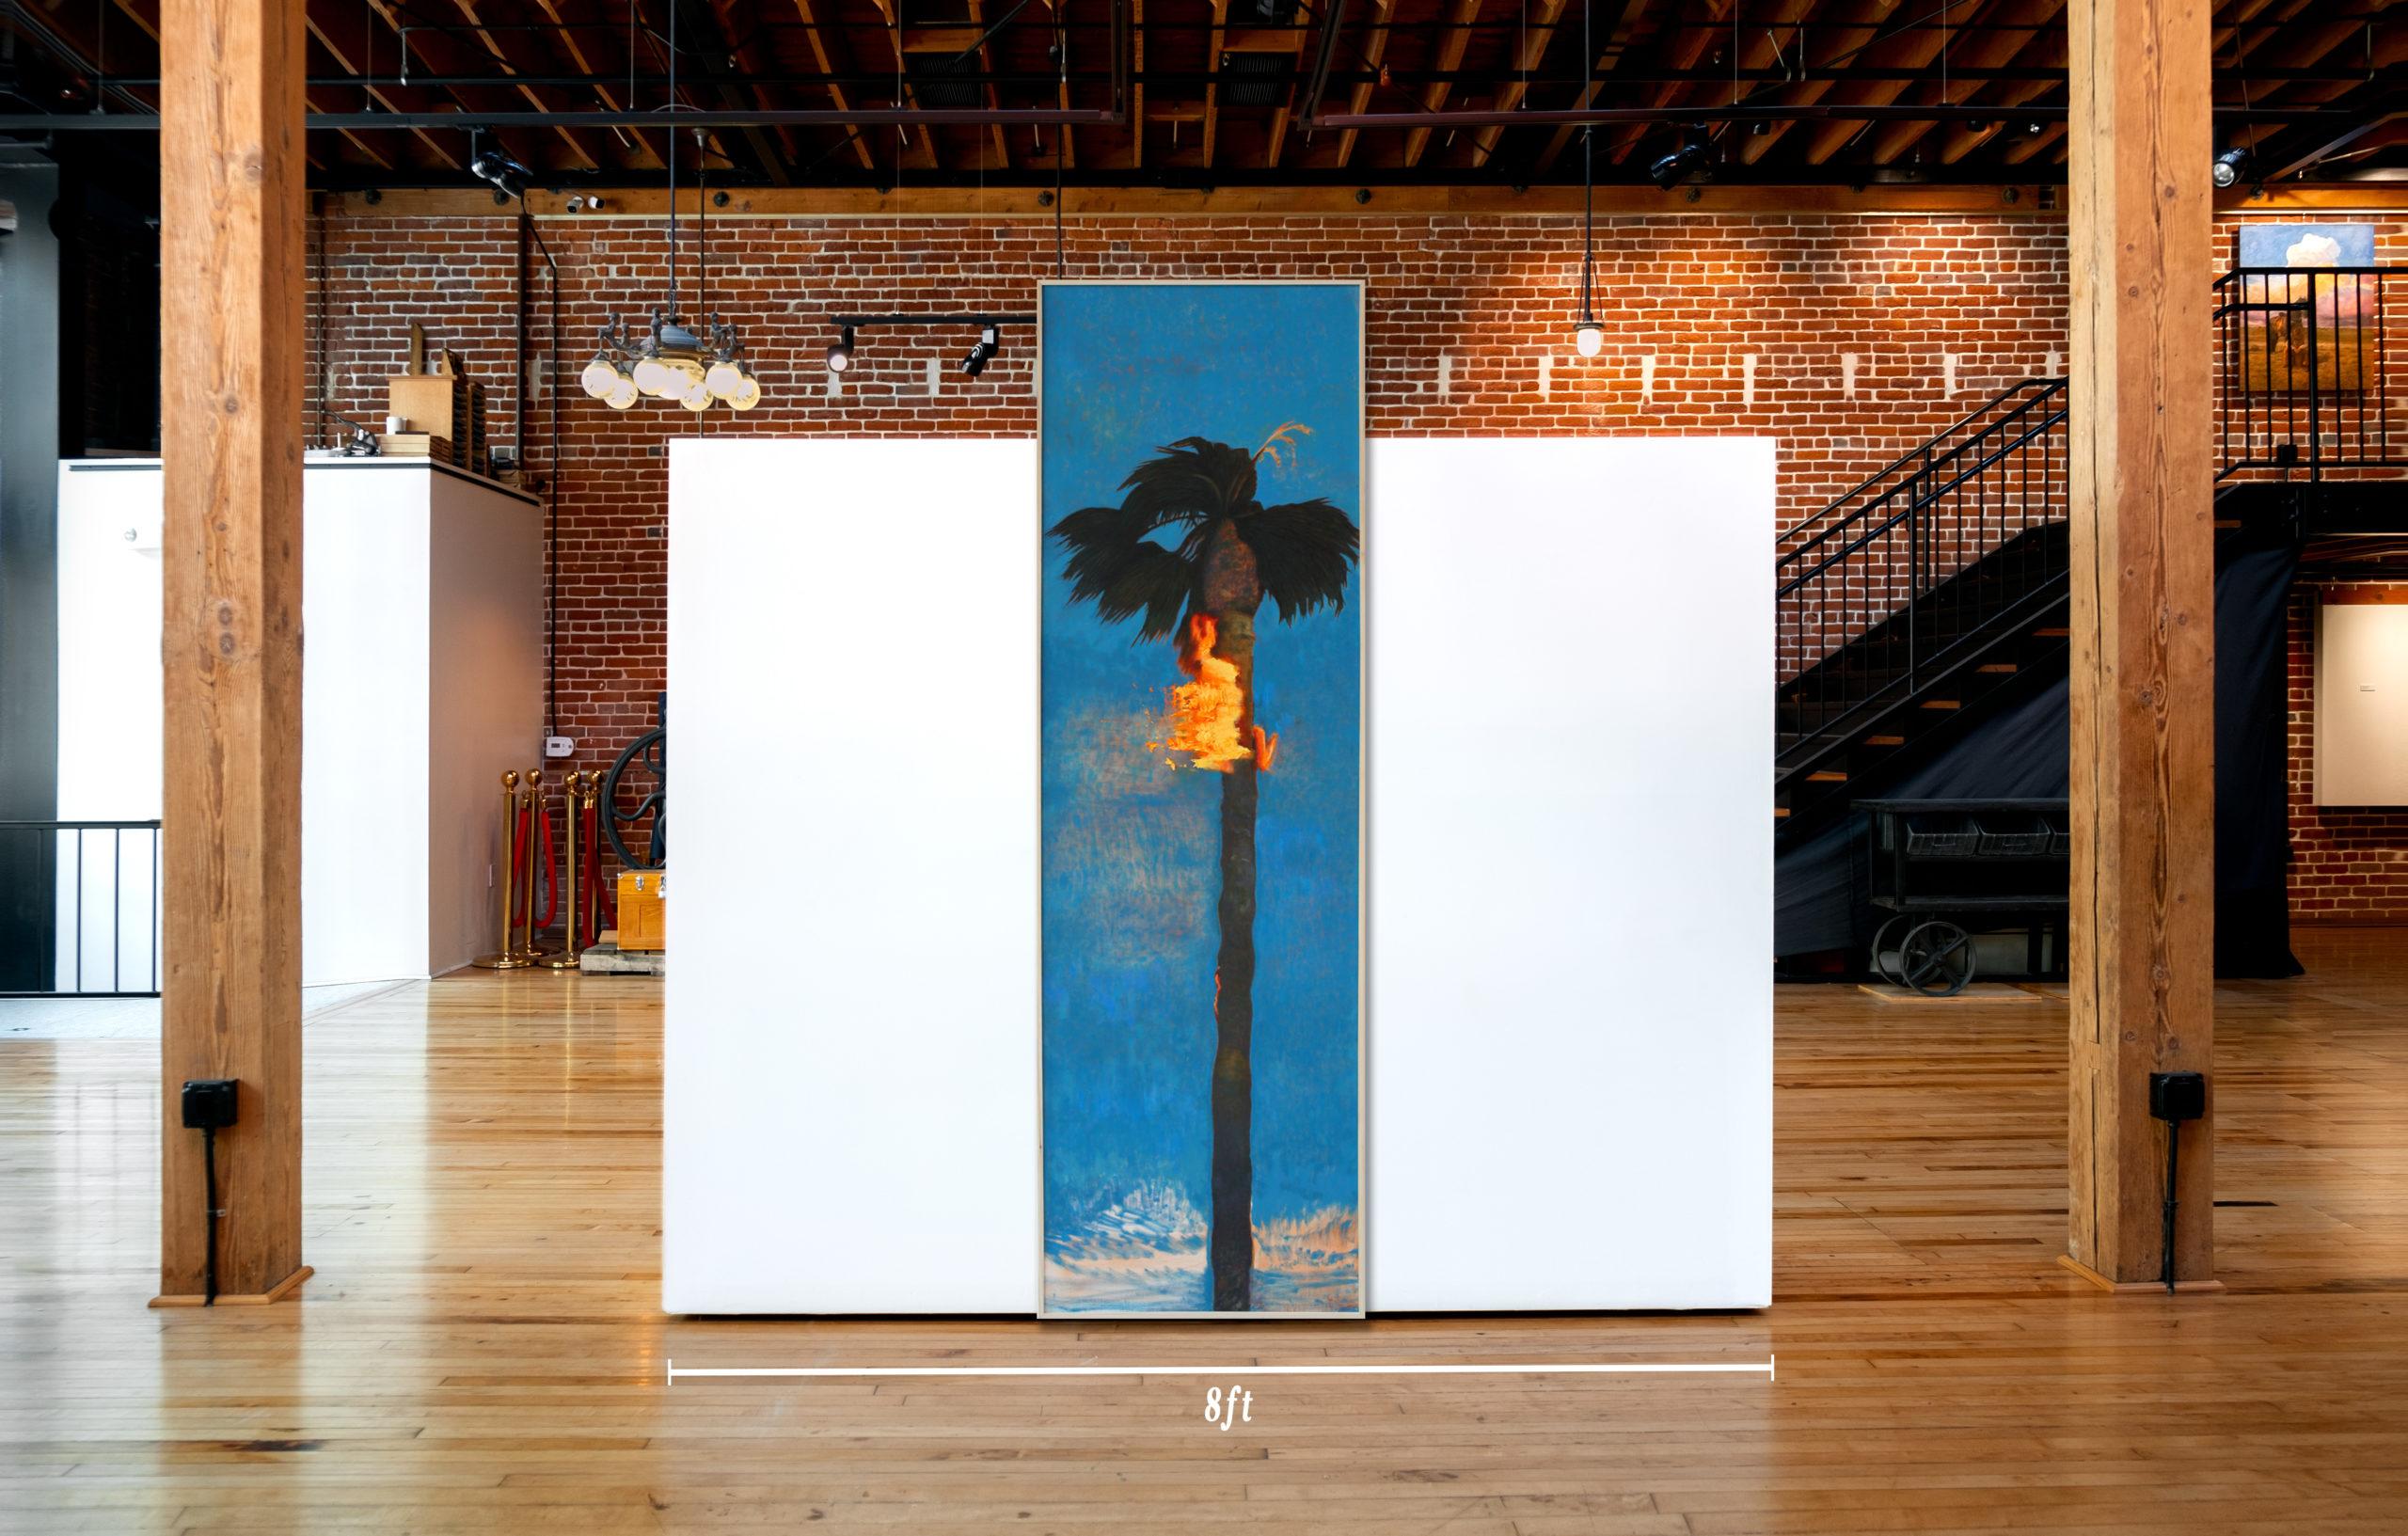 This is a one of a kind original conceptual realistic oil painting by local San Diego artist, Perry Vàsquez. Its dimensions are 28.5 x 96.5. It comes in a wooden neutral frame. 

The artist has depicted a palm tree on fire against a blue sky